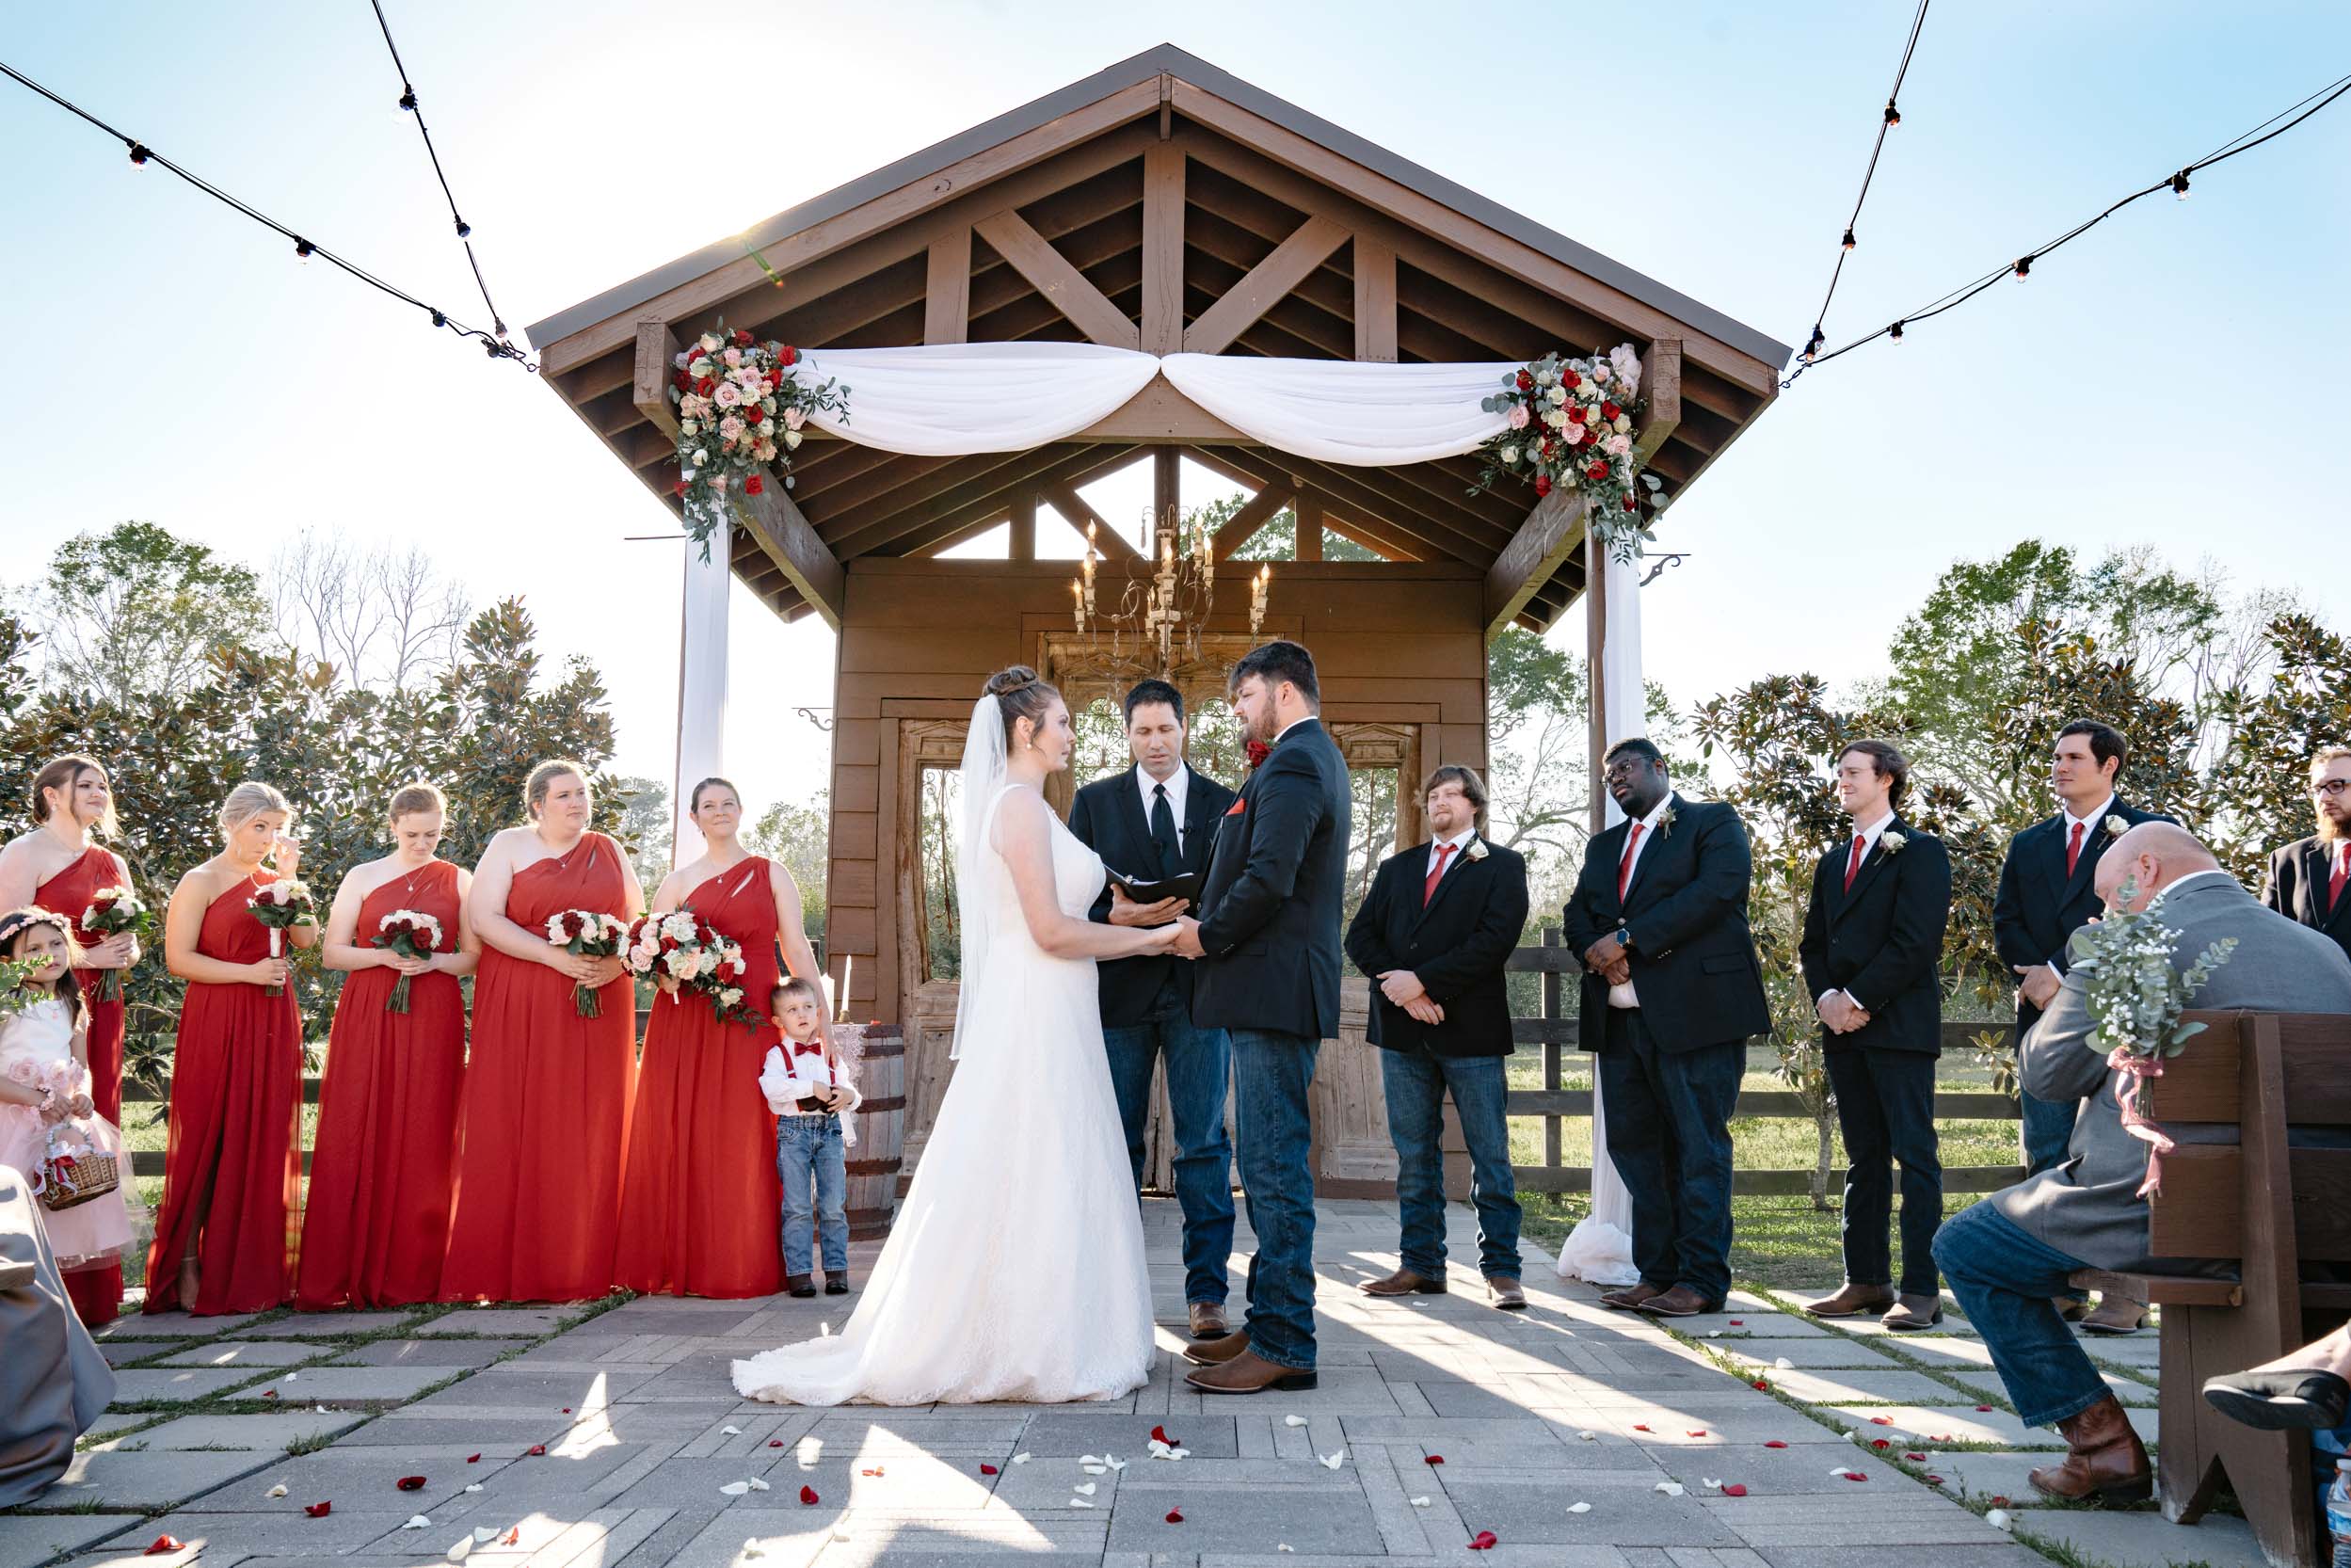 wedding ceremony under an arbor of flowers at Berry Barn in Amite, Lousiana